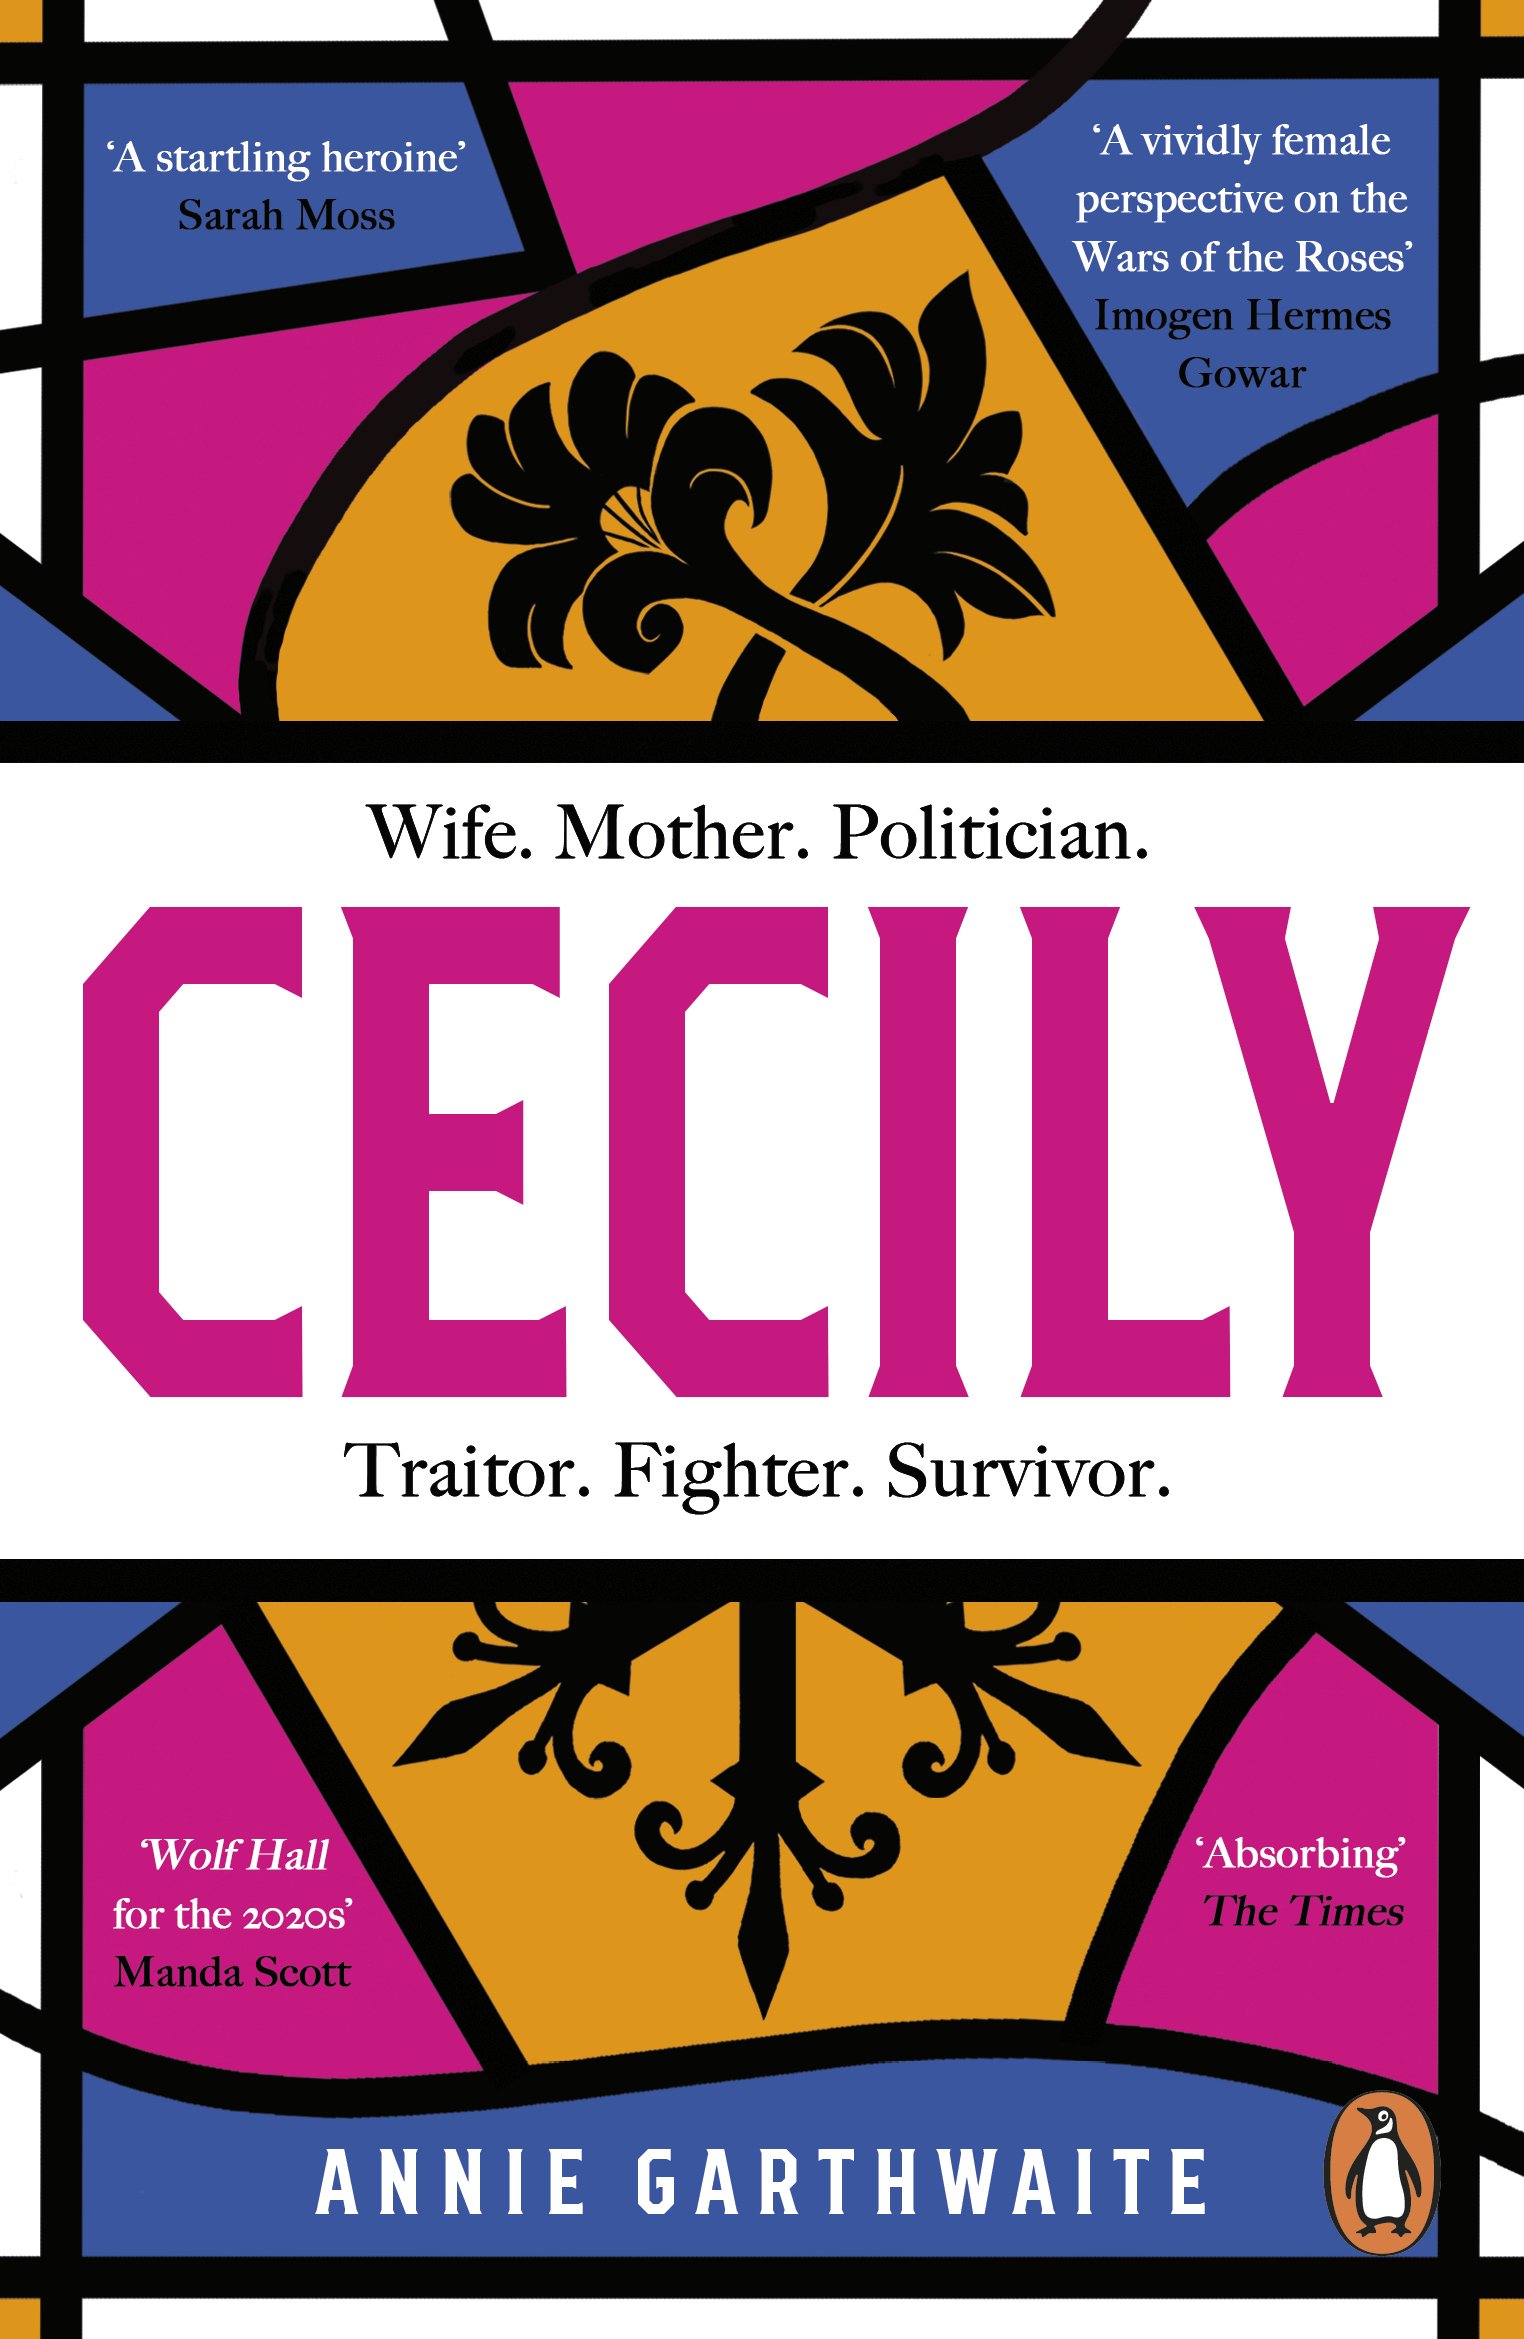 CECILY paperback cover